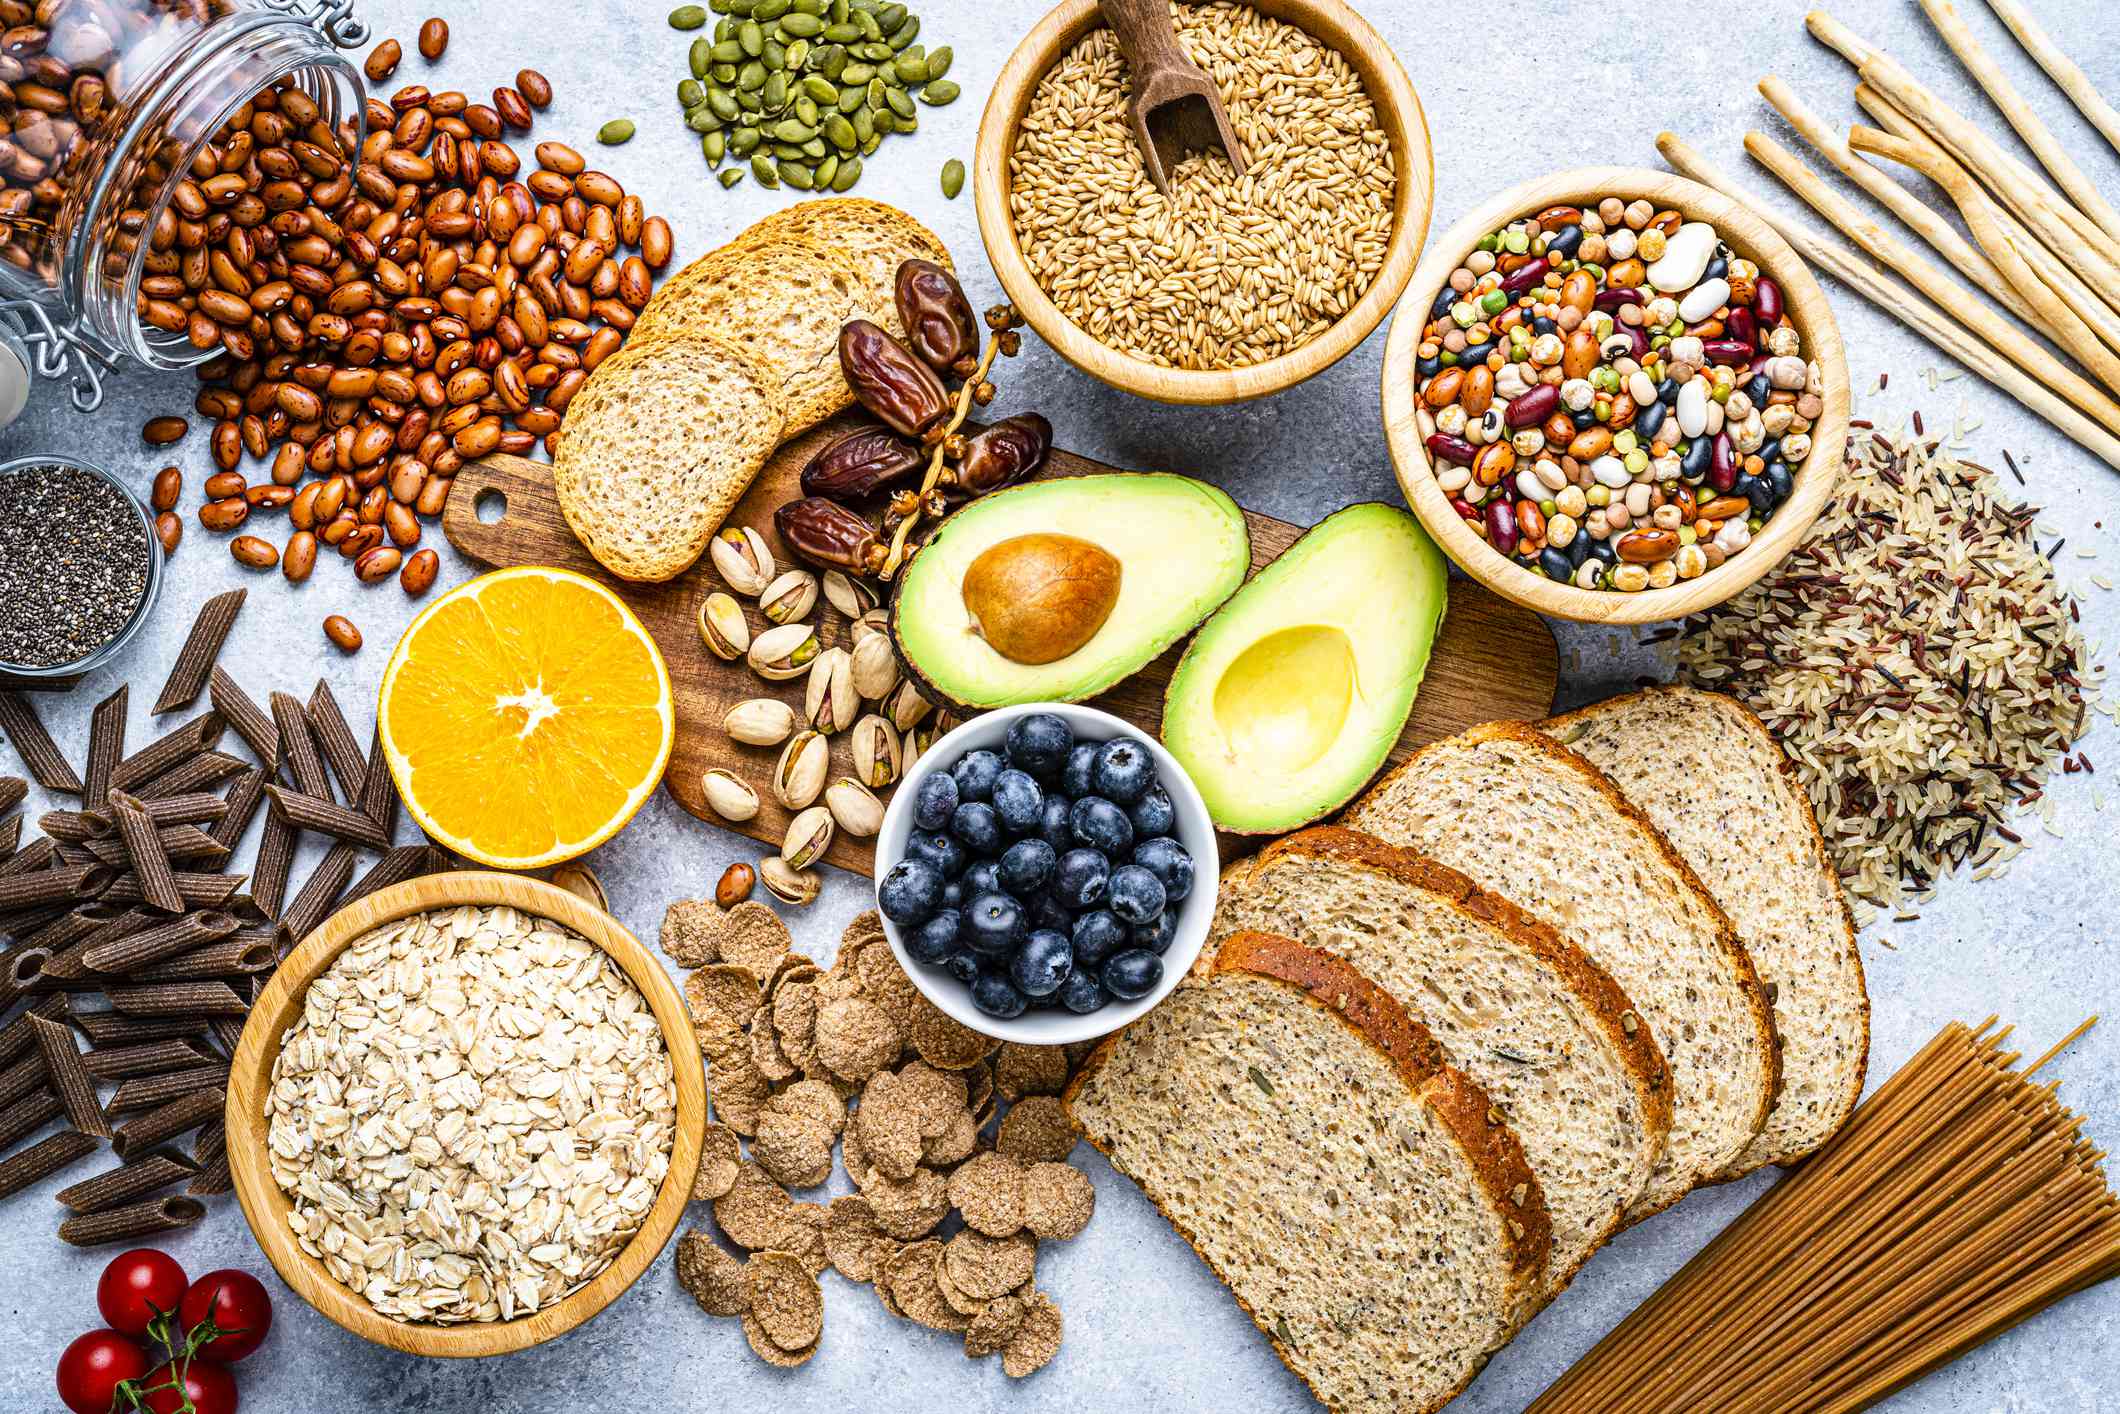 Power Up Your Digestion With These 7 Foods Full Of Fiber